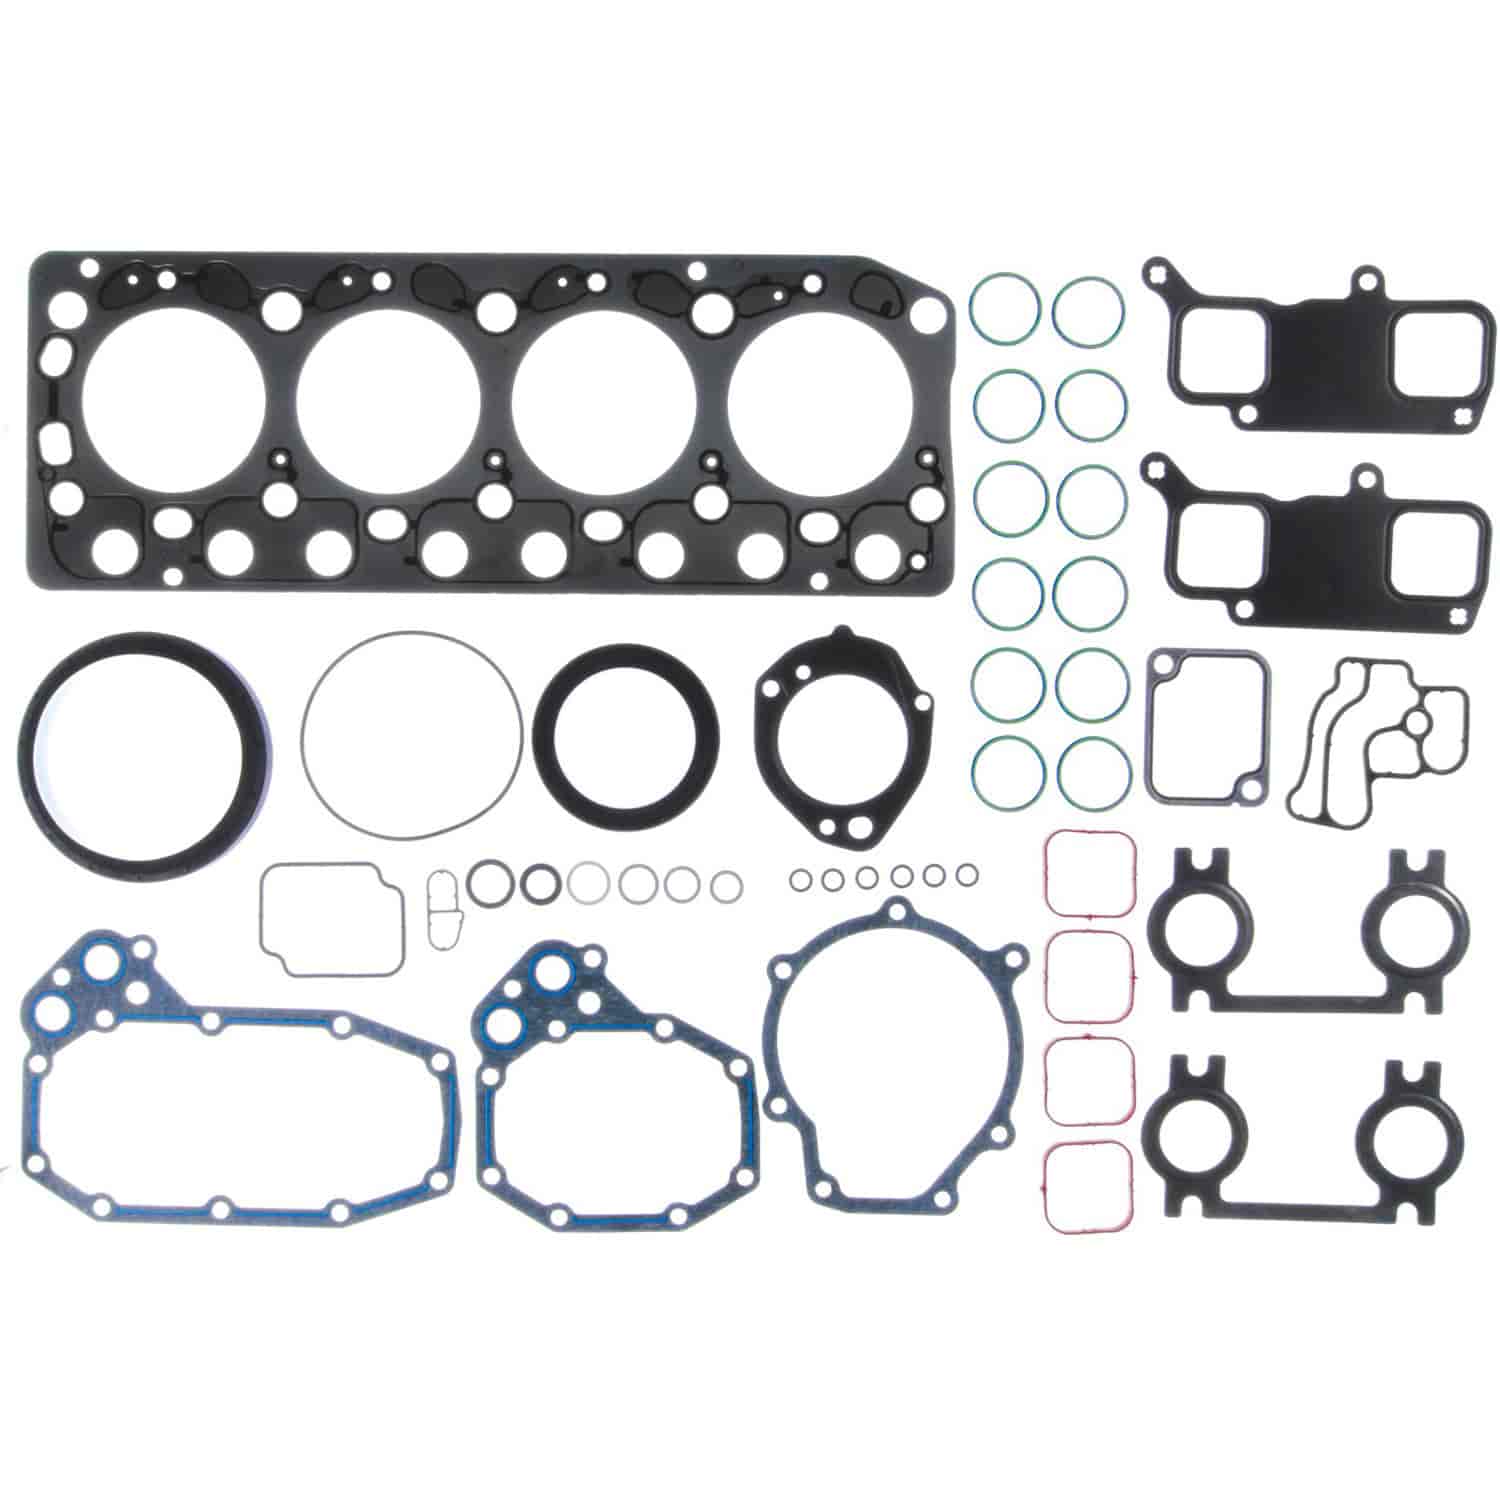 Full Set Mercedes Benz OM904 Without Valve Cover and Oil Pan Gaskets